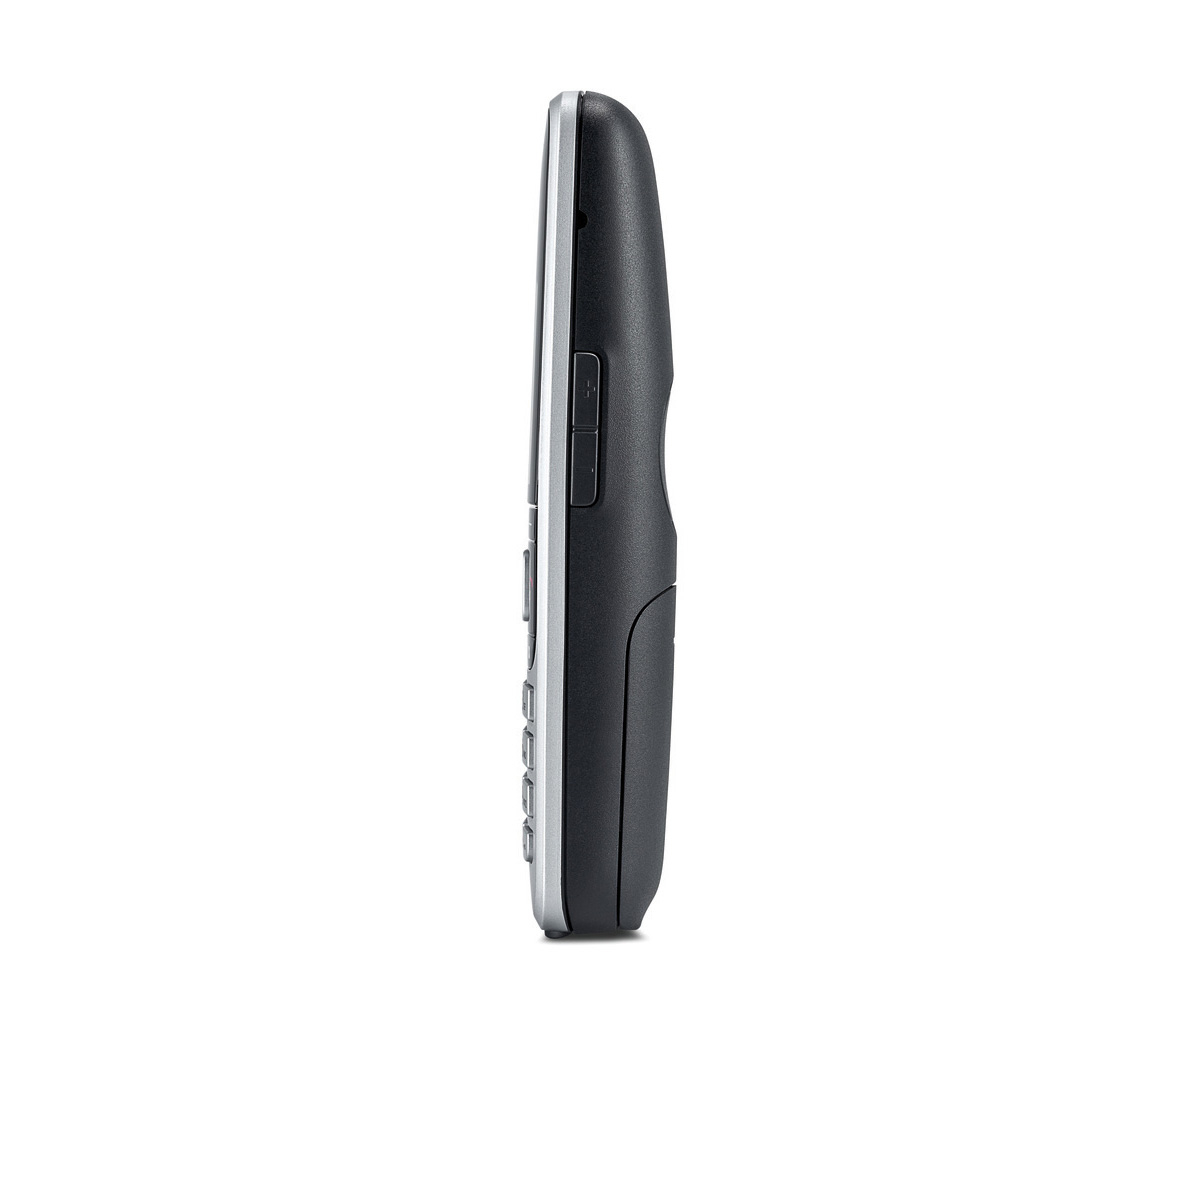 Buy Gigaset PREMIUM 100HX cordless phone for router with DECT base | Gigaset | DECT-Telefone